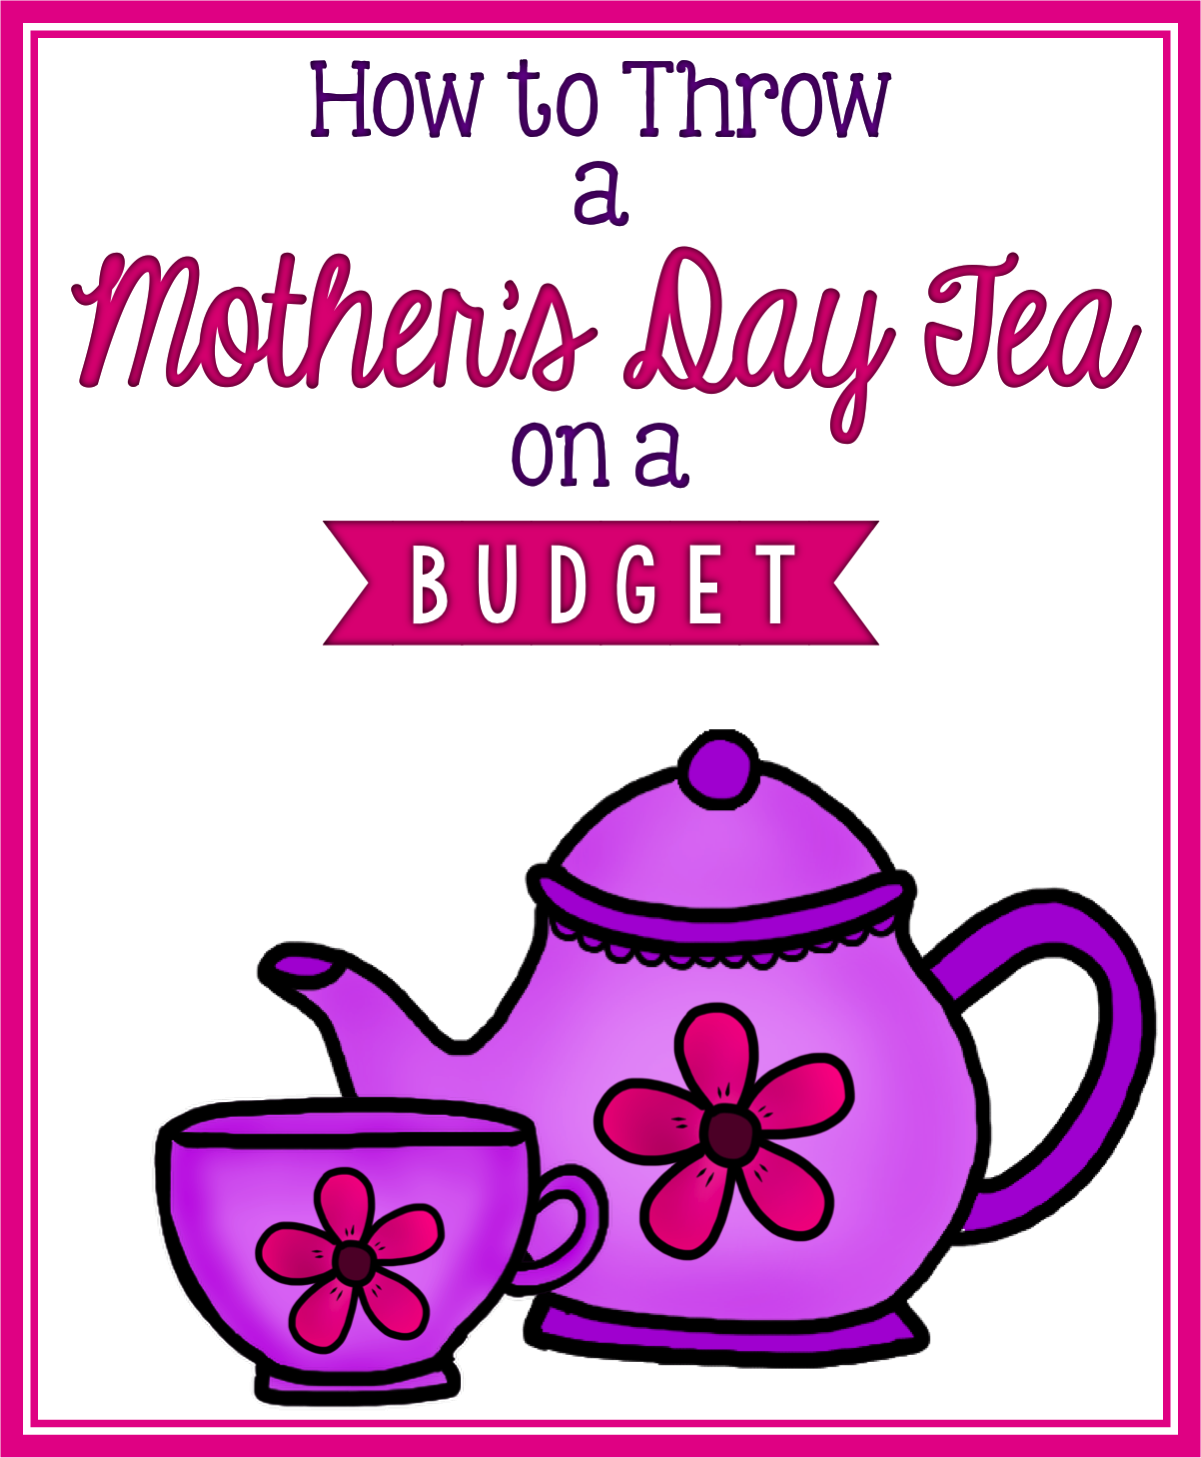 tea clipart mother's day